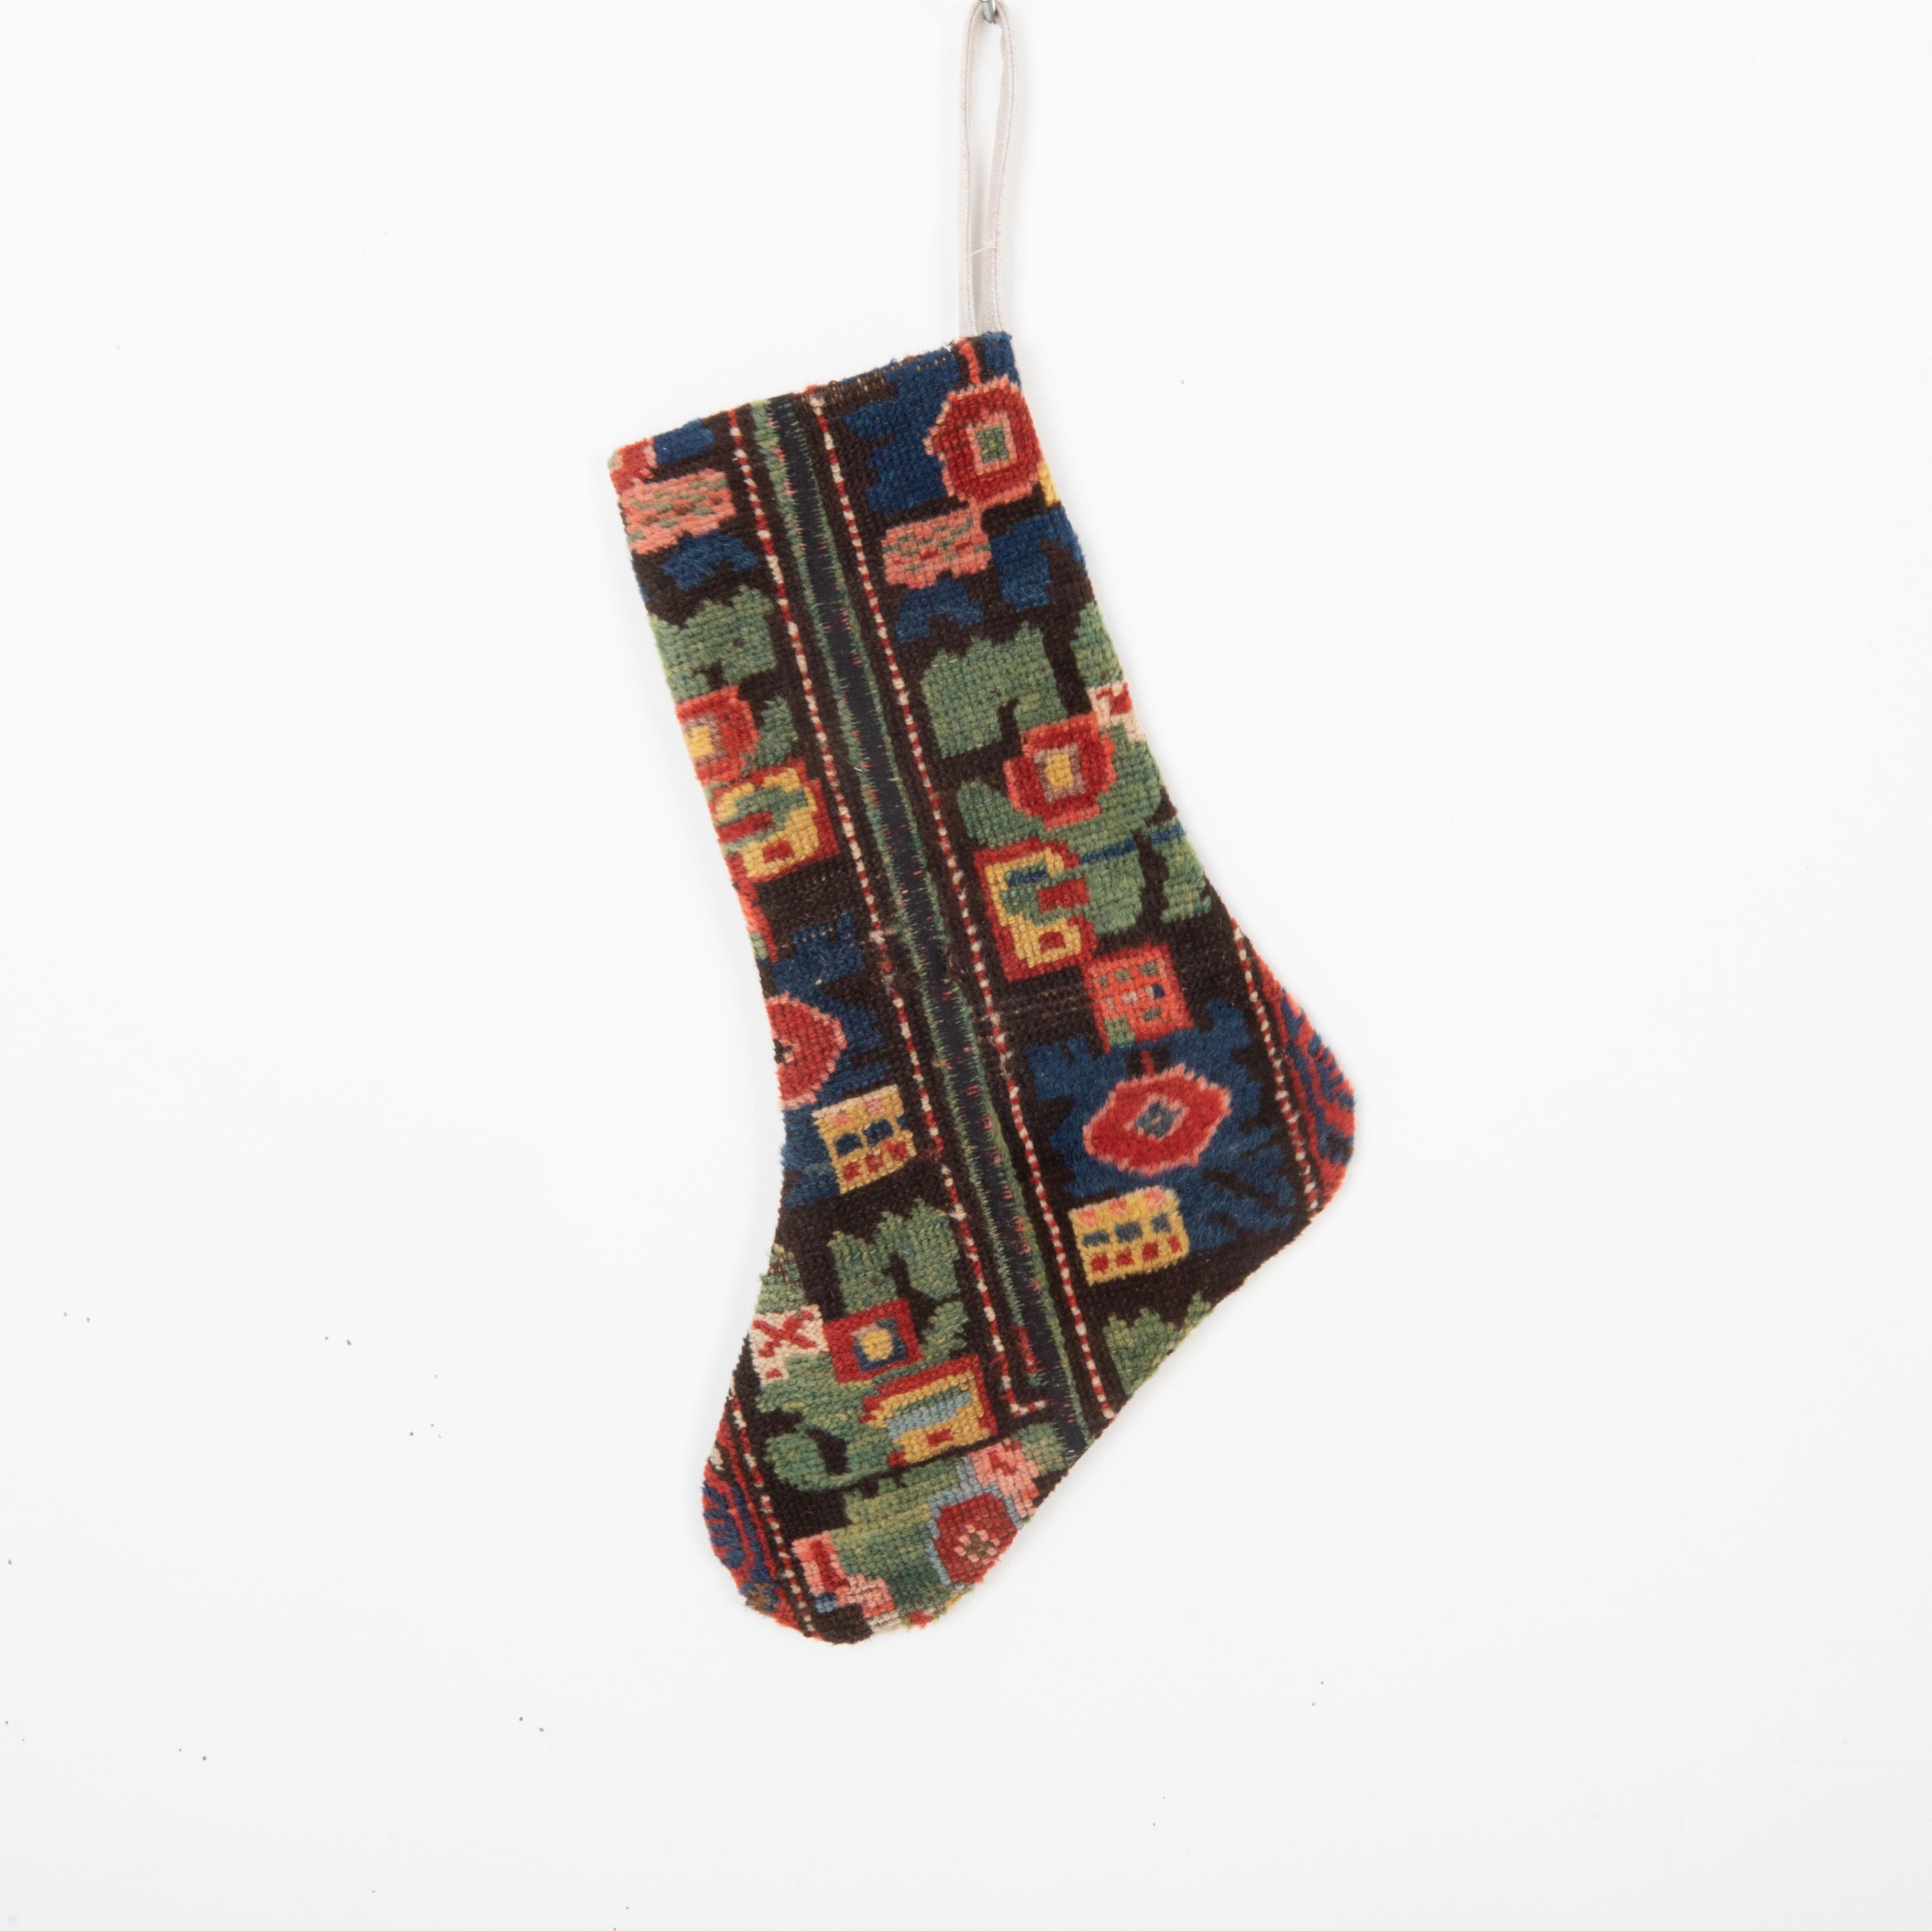 This Christmas Stocking was made from a late 19th or Early 20th C. Caucasıan rug fragments.
Linen in the back.
